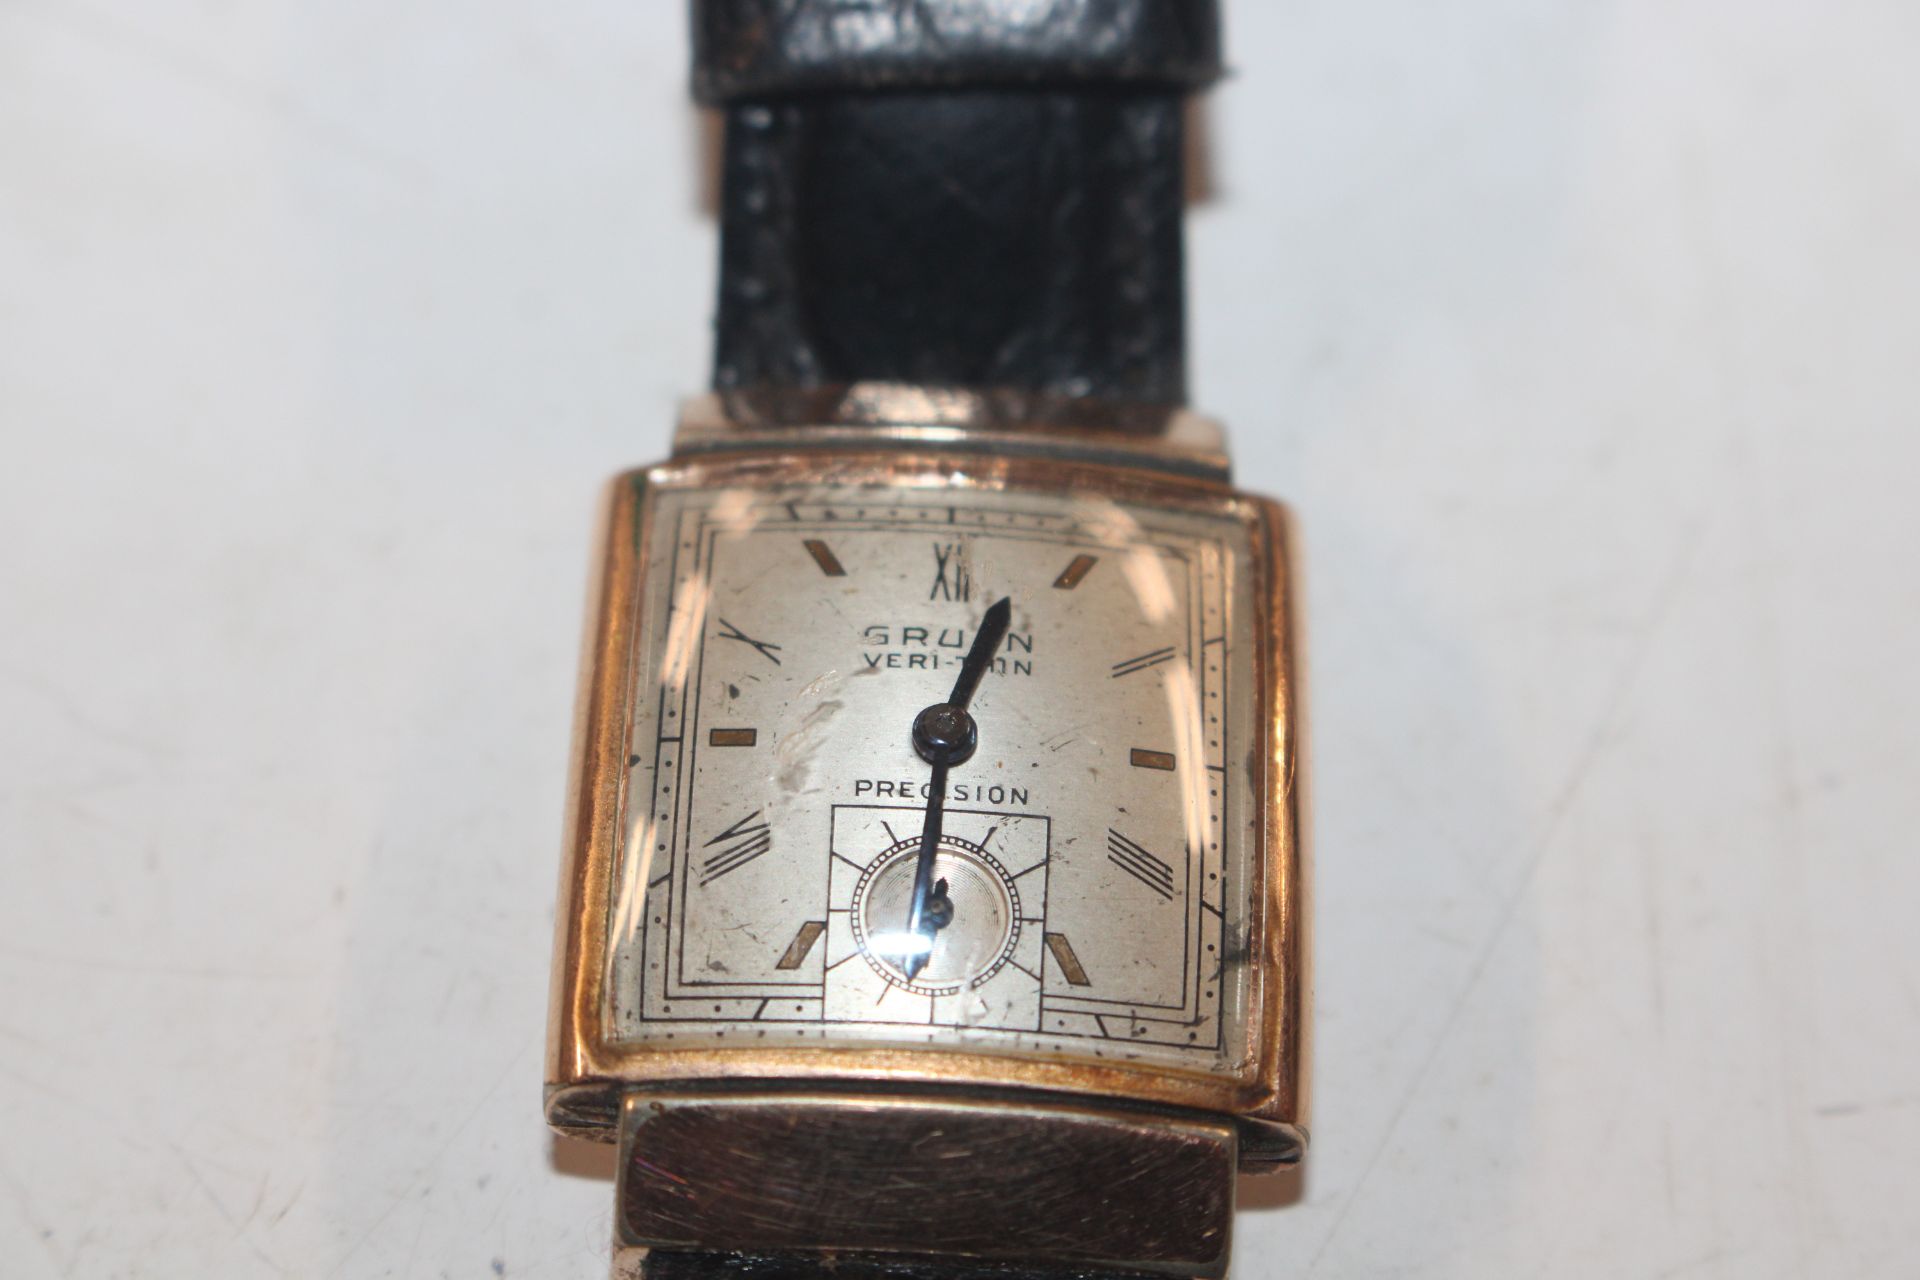 A basket containing 10K gold filled wrist watch; c - Image 19 of 21